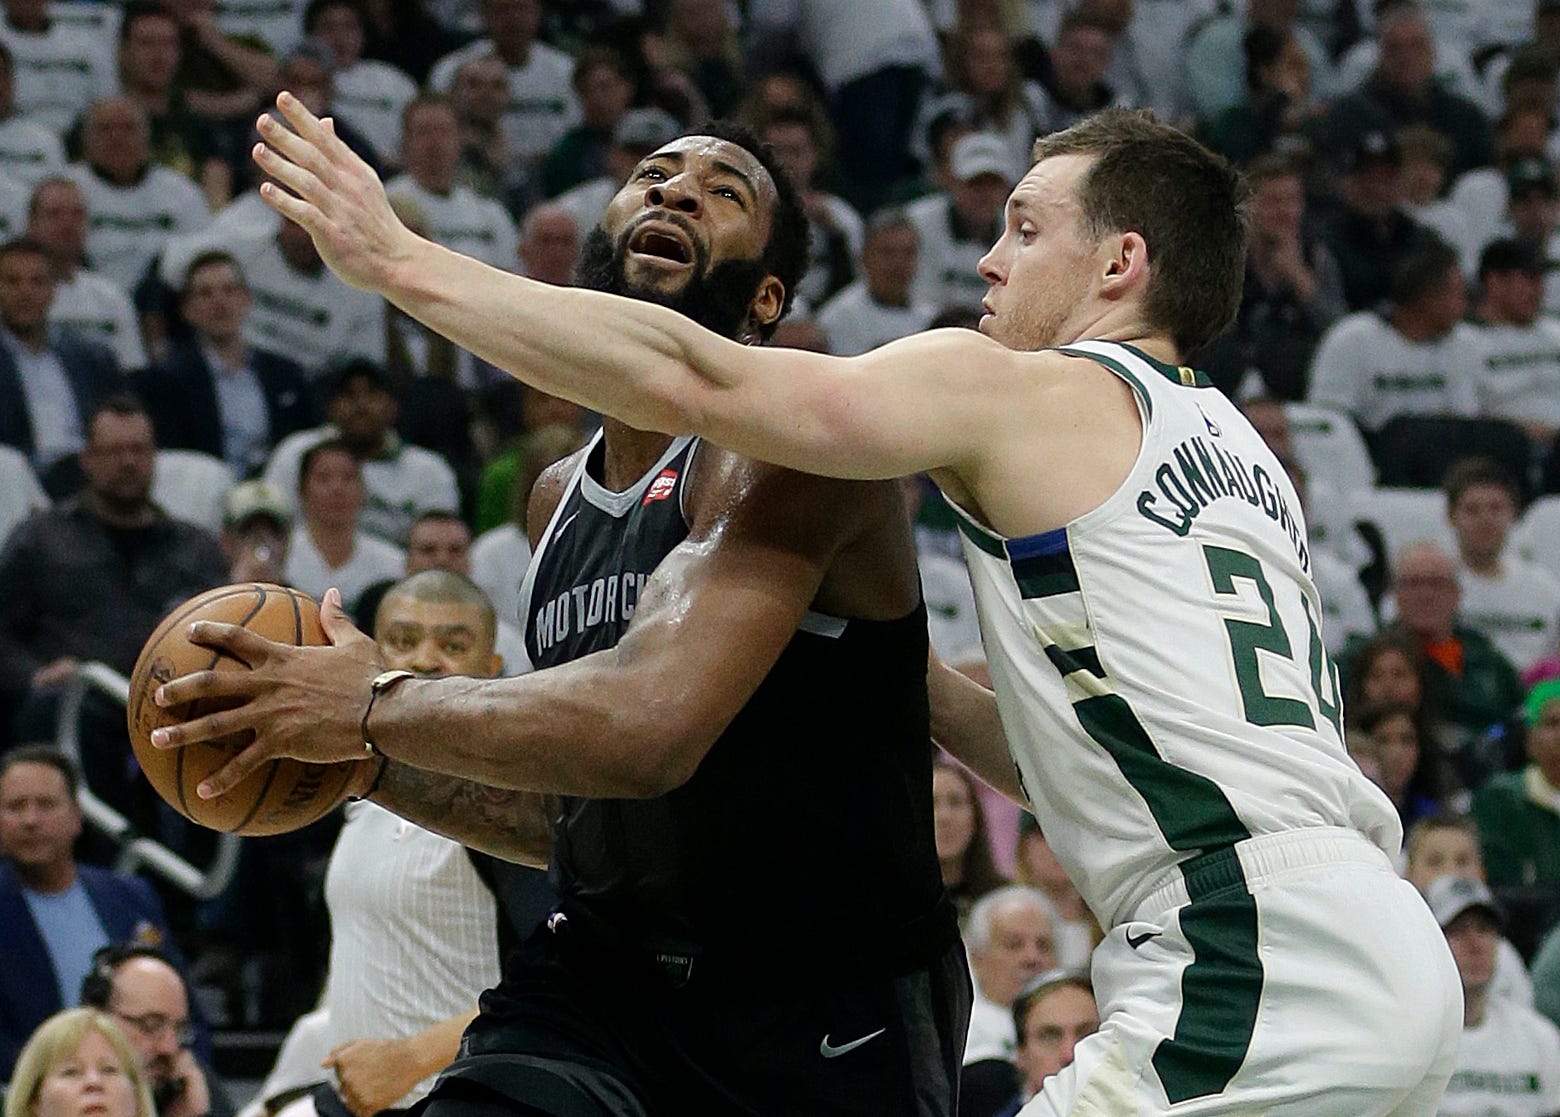 Pistons ' Andre Drummond, left, drives to the basket against Bucks ' Pat Connaughton during the first half.